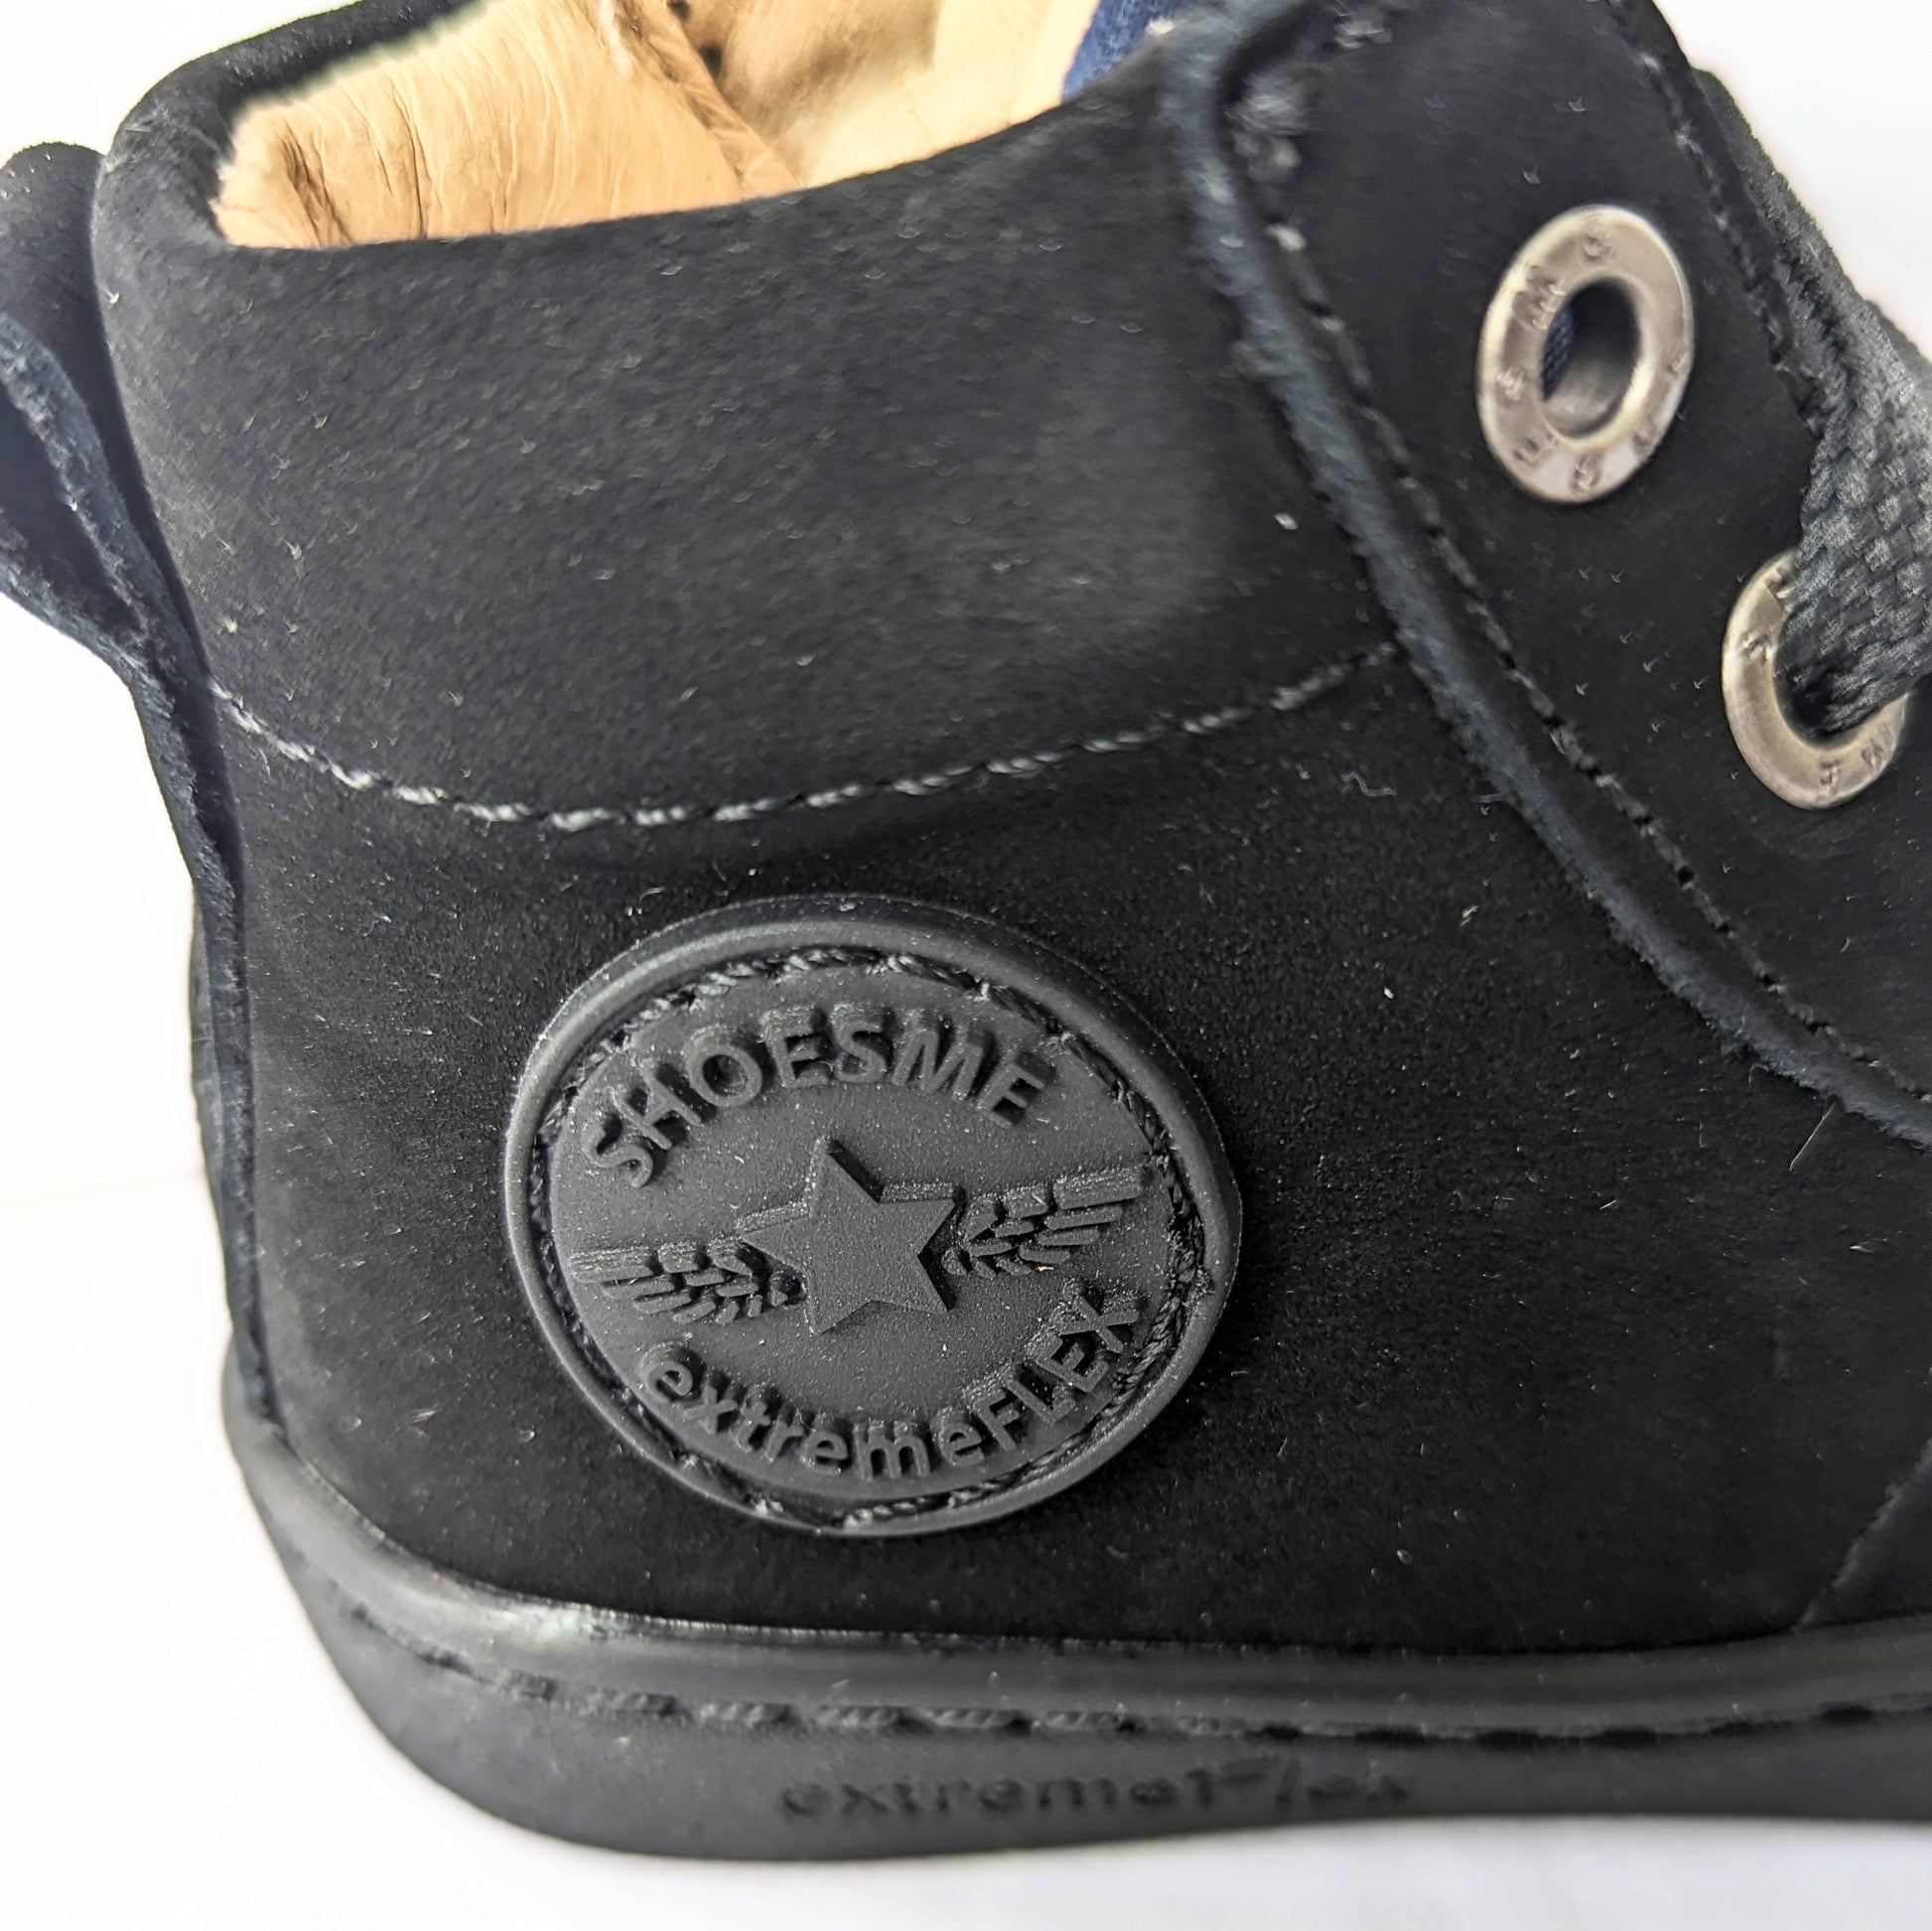 A unisex hi-top boot by Shoesme, style FL23W002-A in black leather nubuck with lace and zip fastening. Close up of shoesme motif.